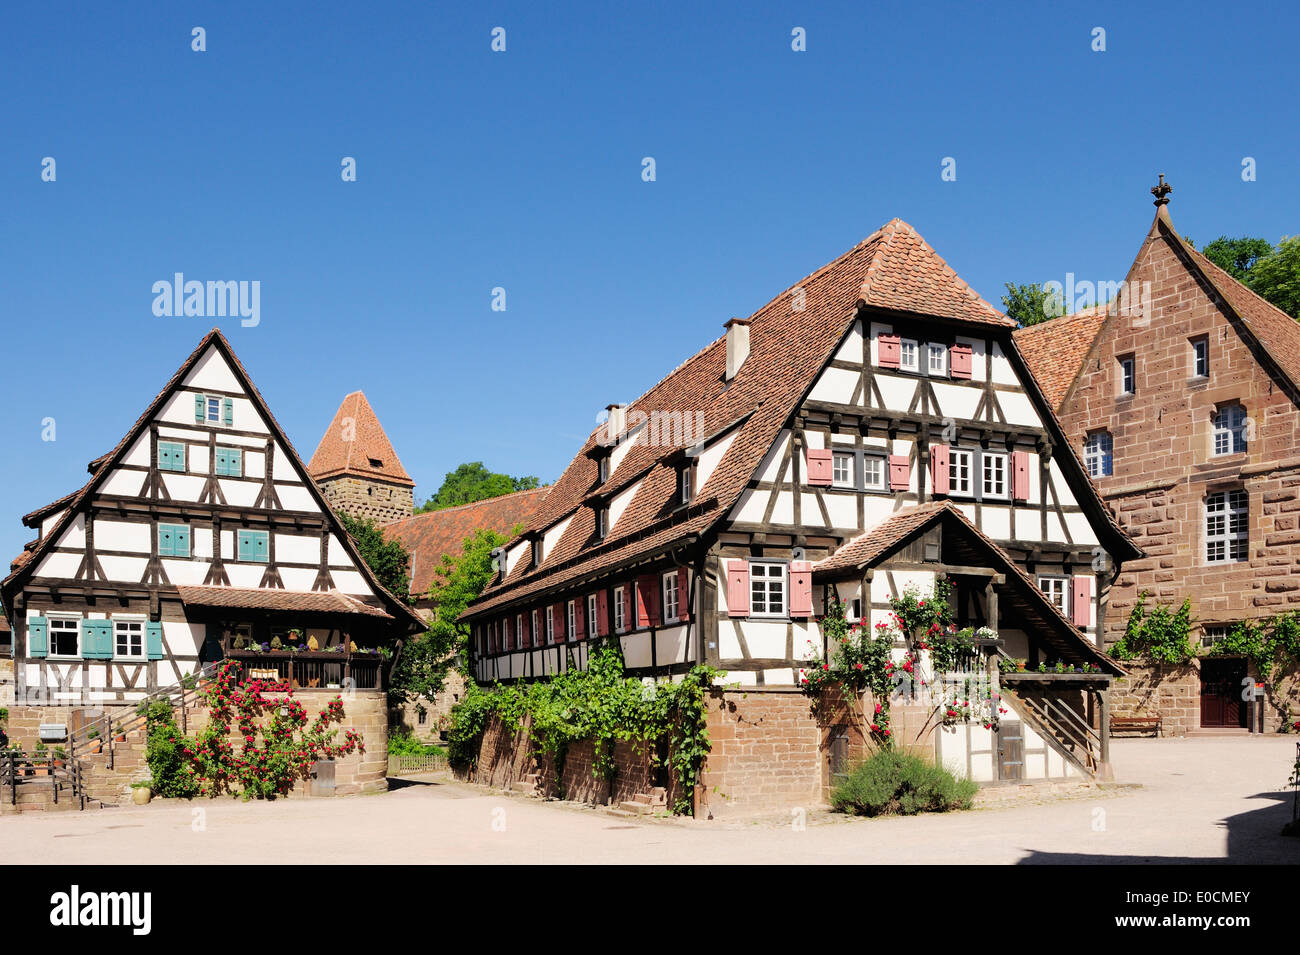 Half-timbered houses at courtyard of monastery Kloster Maulbronn, Maulbronn, Baden-Wuerttemberg, Germany, Europe Stock Photo